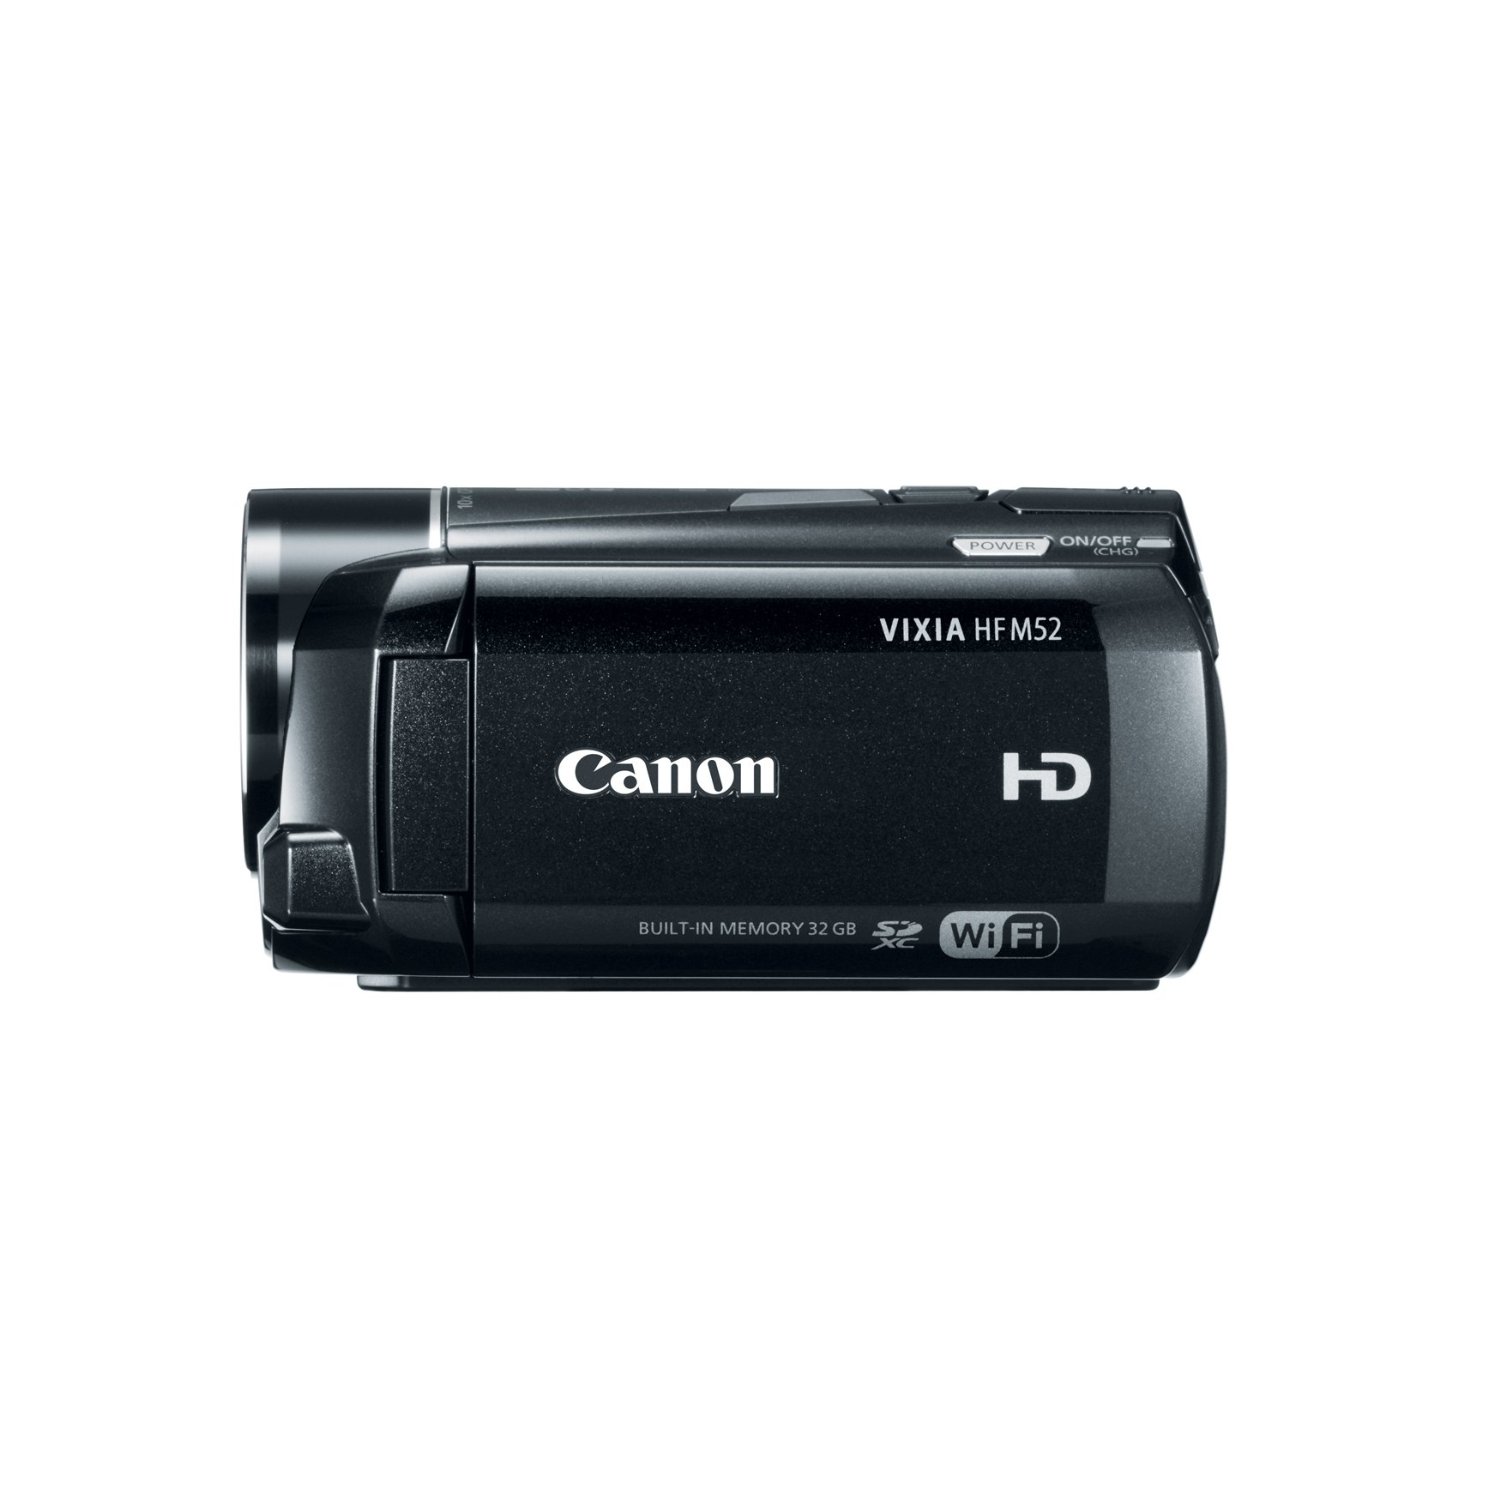 http://thetechjournal.com/wp-content/uploads/images/1204/1334815378-canon-vixia-hf-m52-full-hd-10x-image-stabilize-camcorder-8.jpg